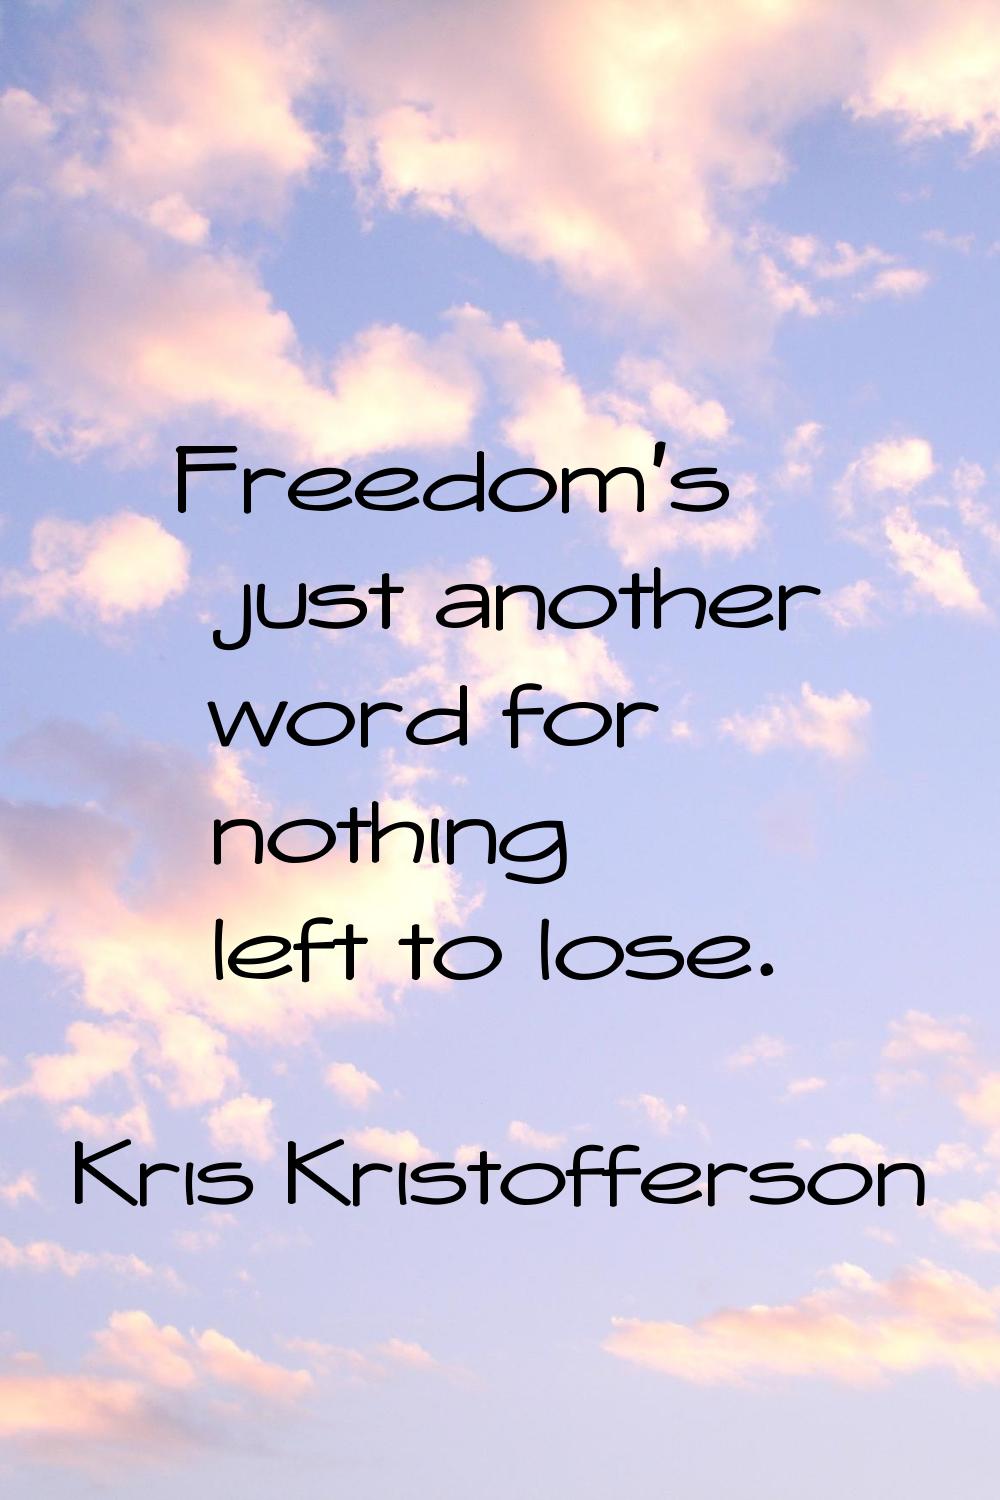 Freedom's just another word for nothing left to lose.